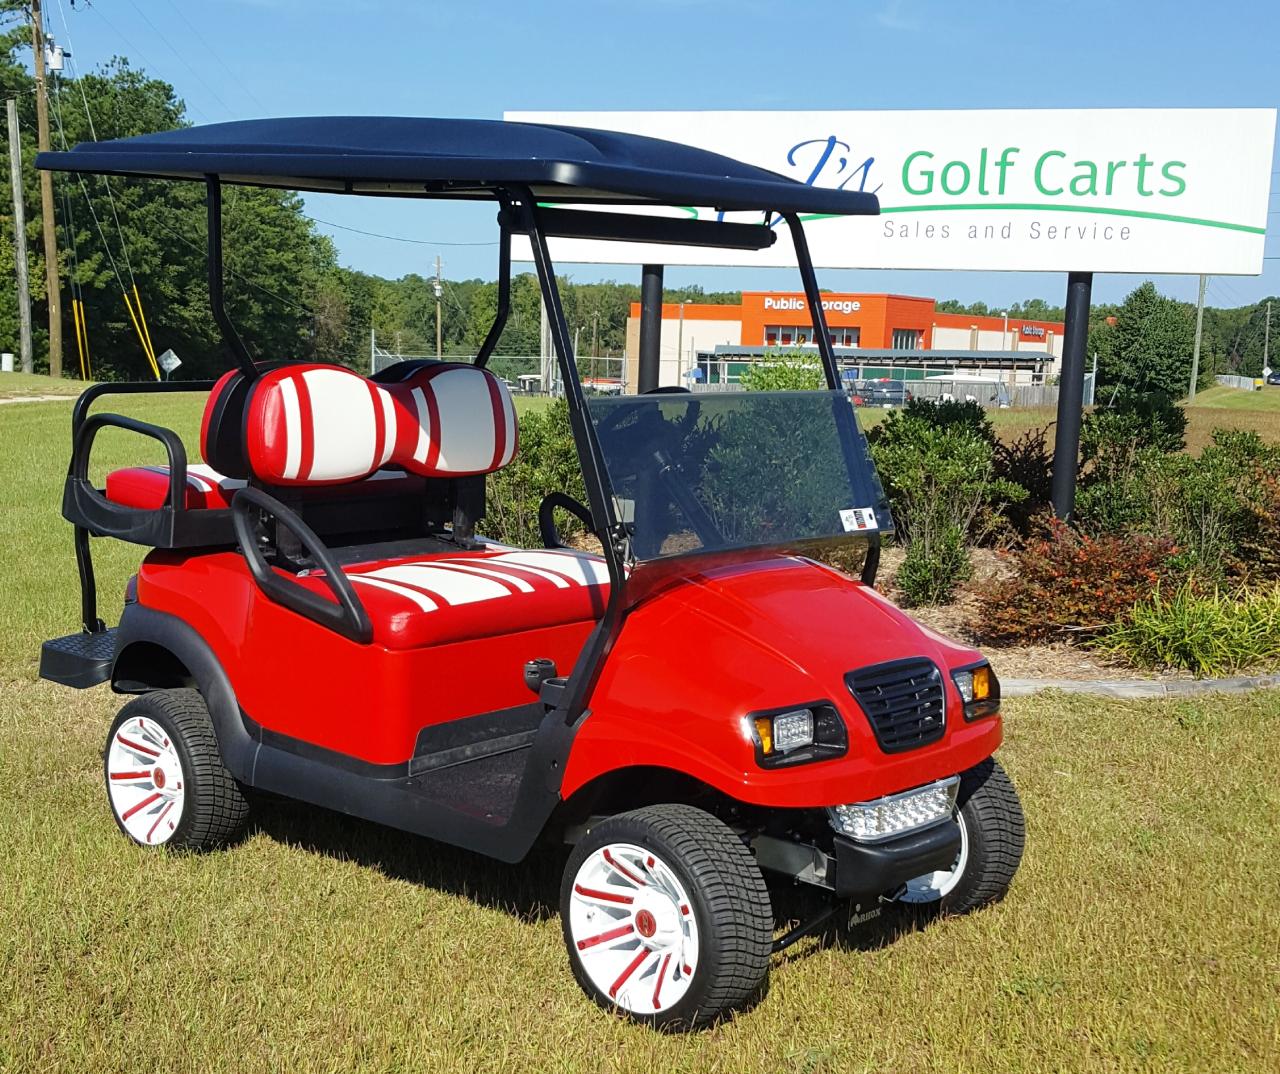 Used Golf Carts for Sale by Owner in Lynchburg, Virginia: Find Your Perfect Ride